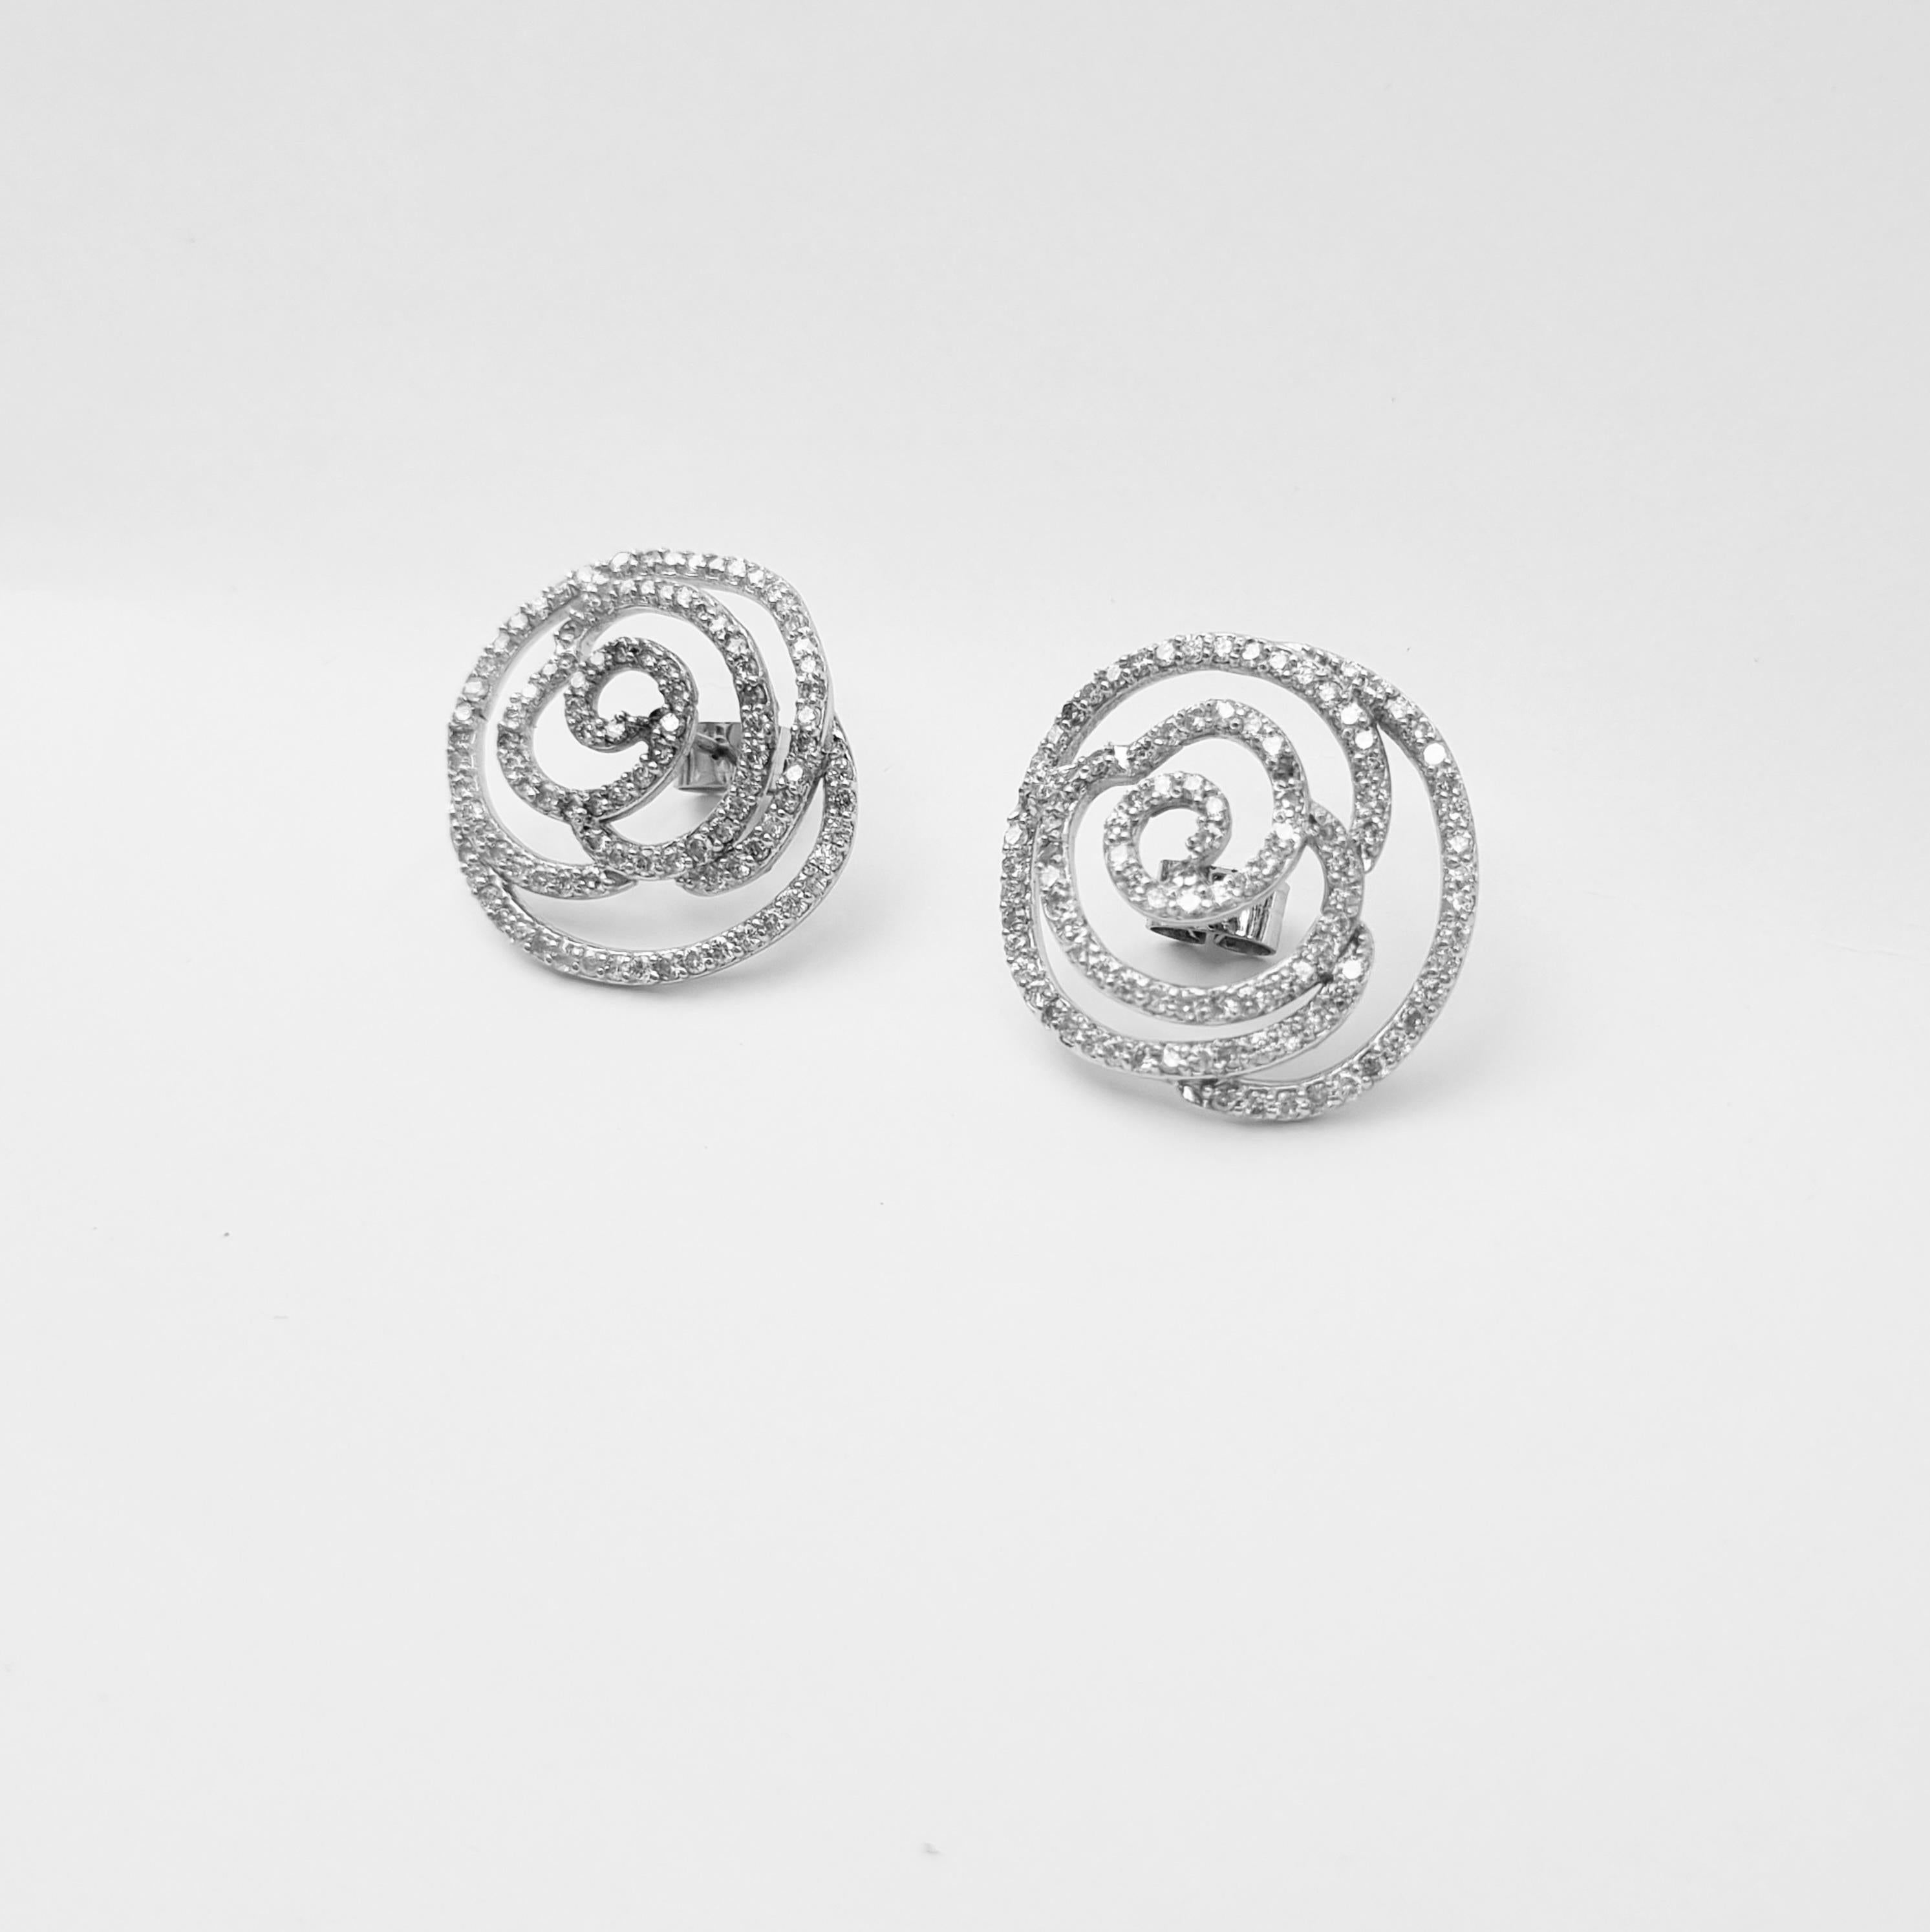 2, 63 Ct Diamonds Pave Earrings, Floral Stud Earrings, 18k Solid White Gold In New Condition For Sale In București, B